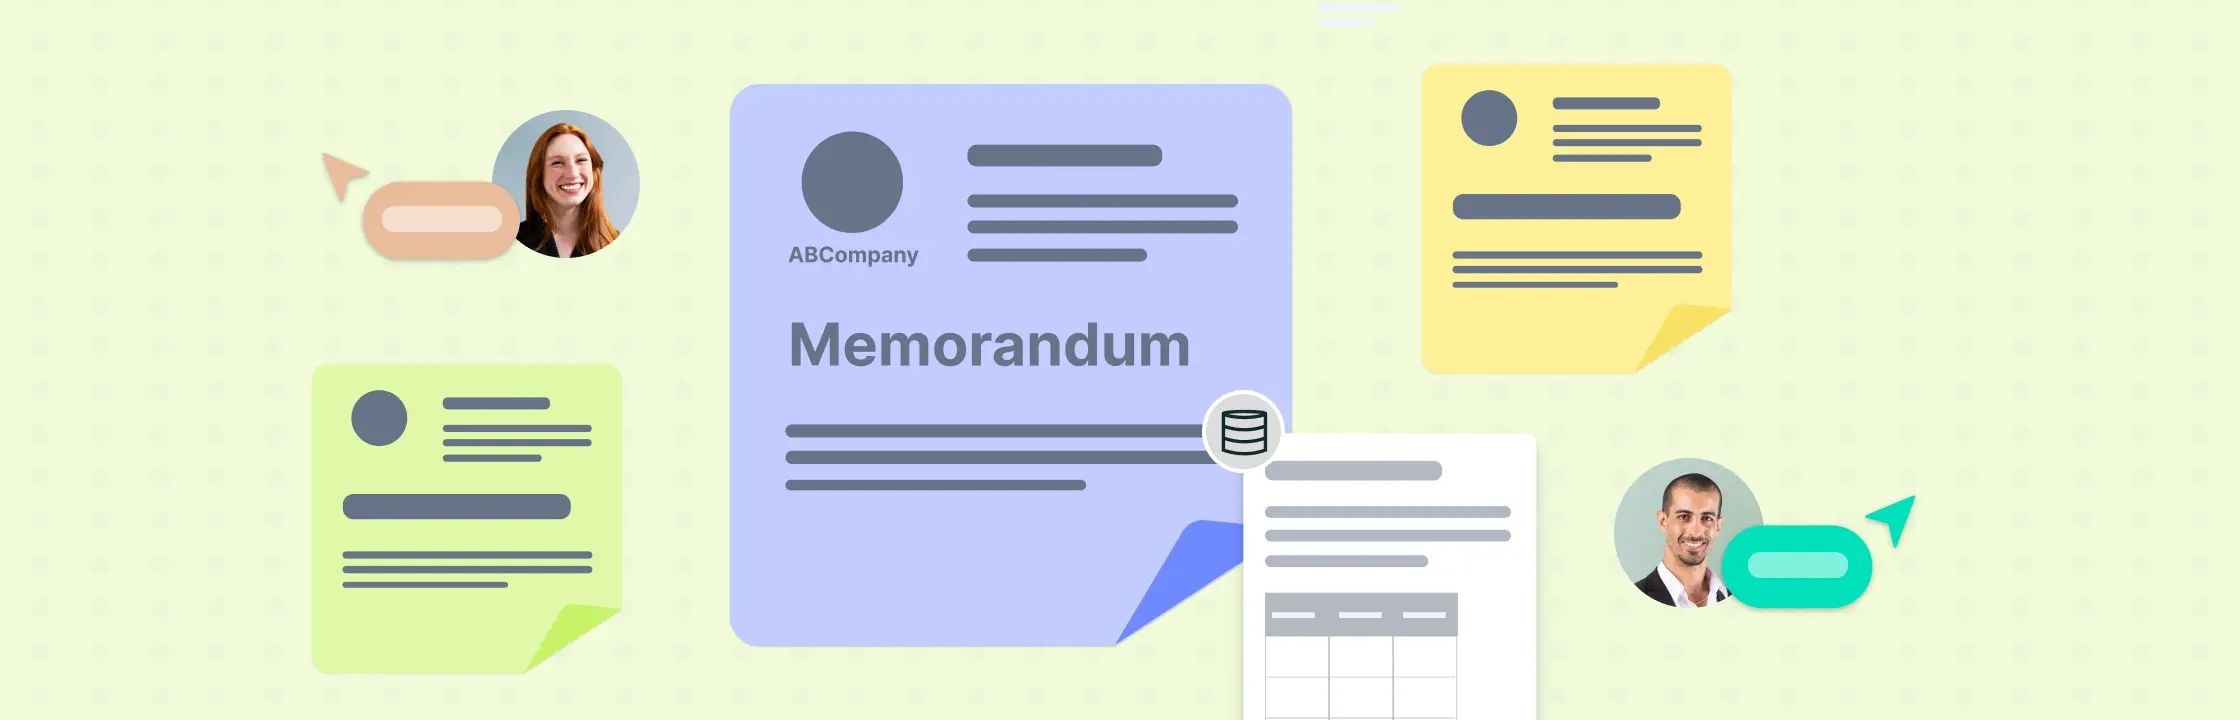 How to Write a Memo: Templates and Examples